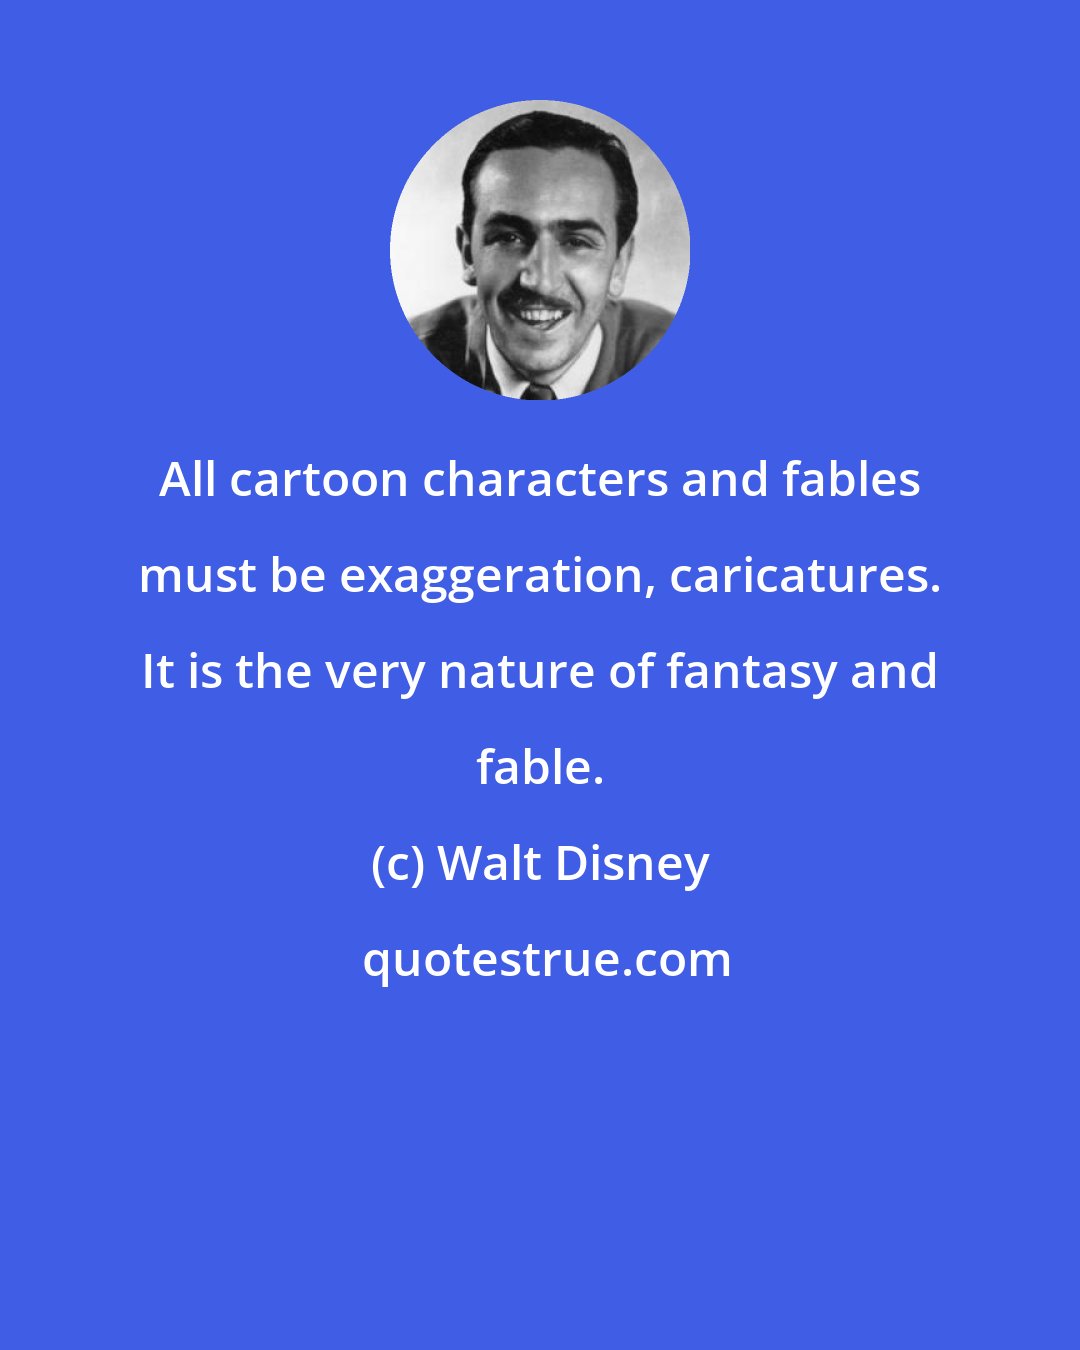 Walt Disney: All cartoon characters and fables must be exaggeration, caricatures. It is the very nature of fantasy and fable.